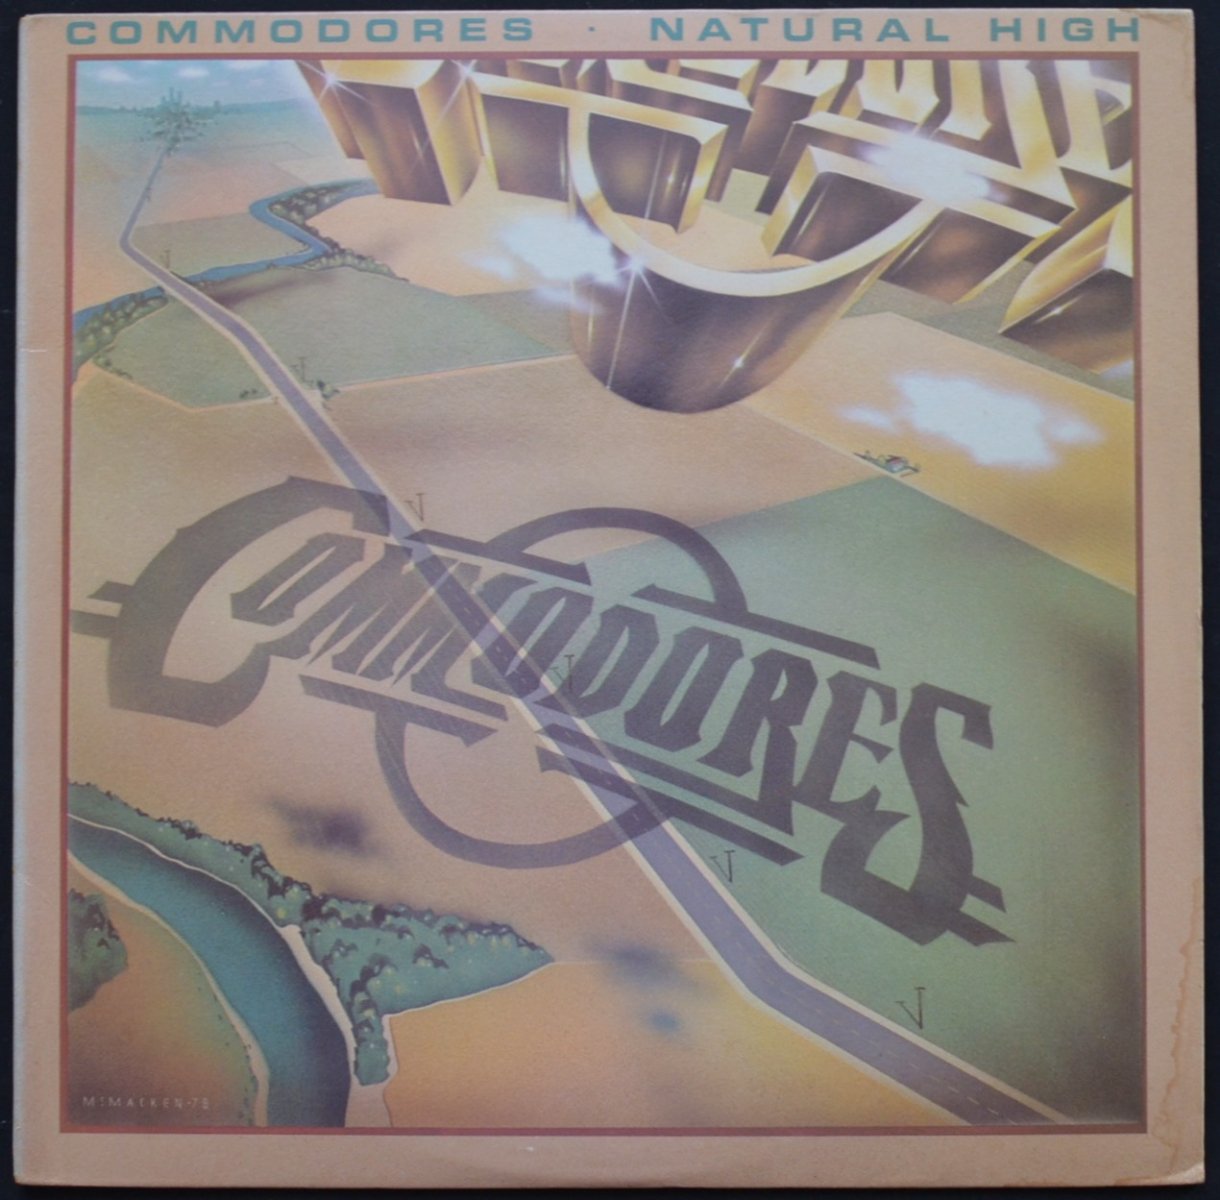 COMMODORES / NATURAL HIGH (LP)